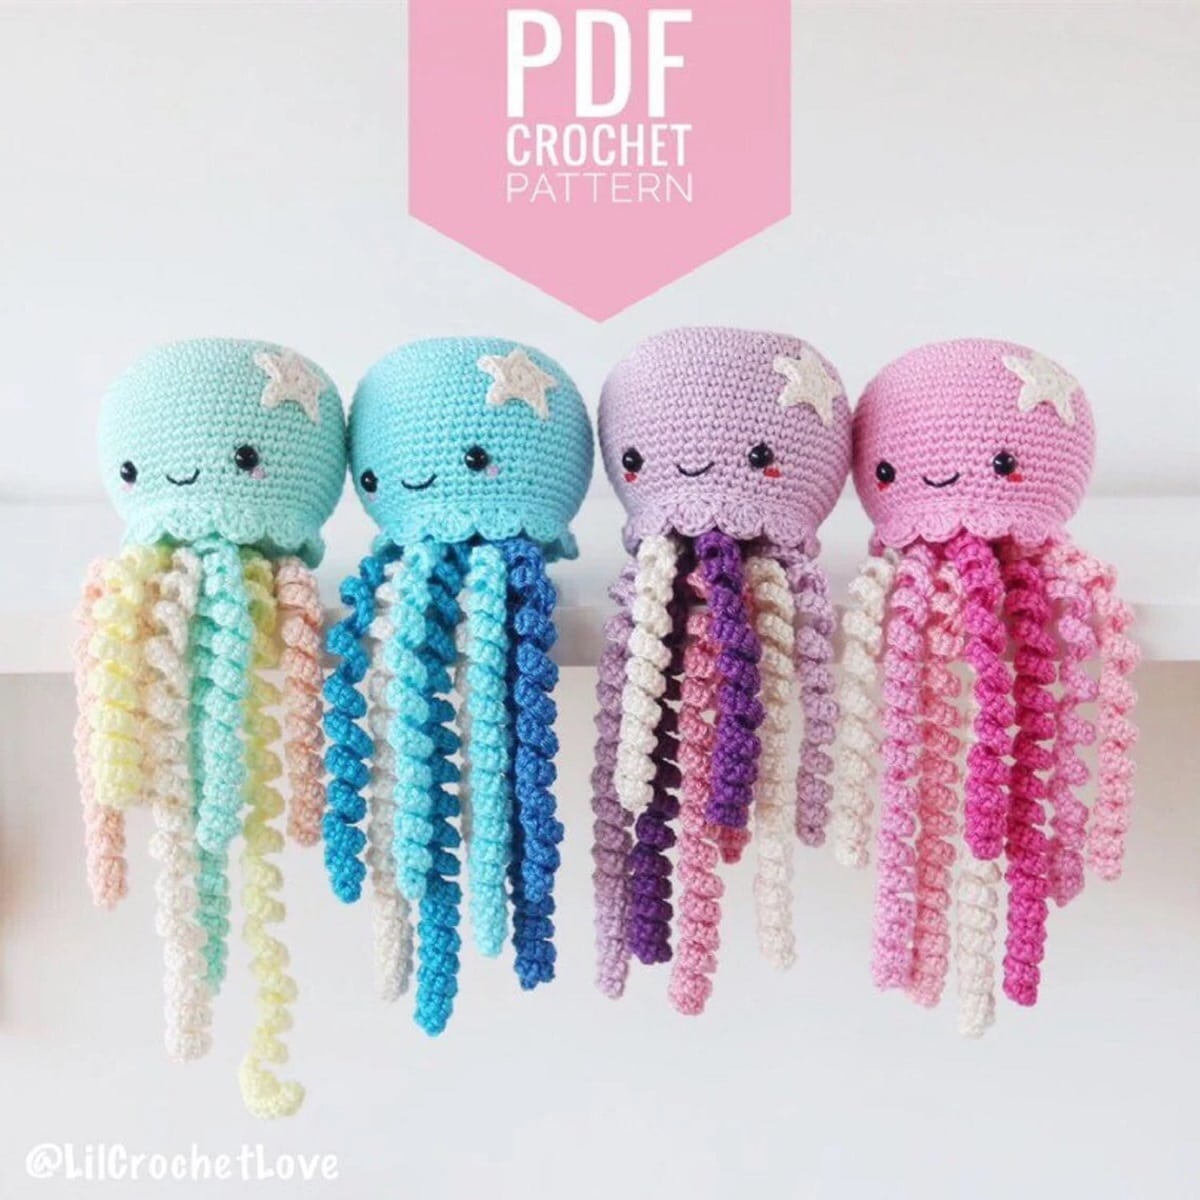 Four small crochet octopus sitting on a shelf together with ruffle style tentacles dangling down. Octopus are green, blue, purple, and pink.